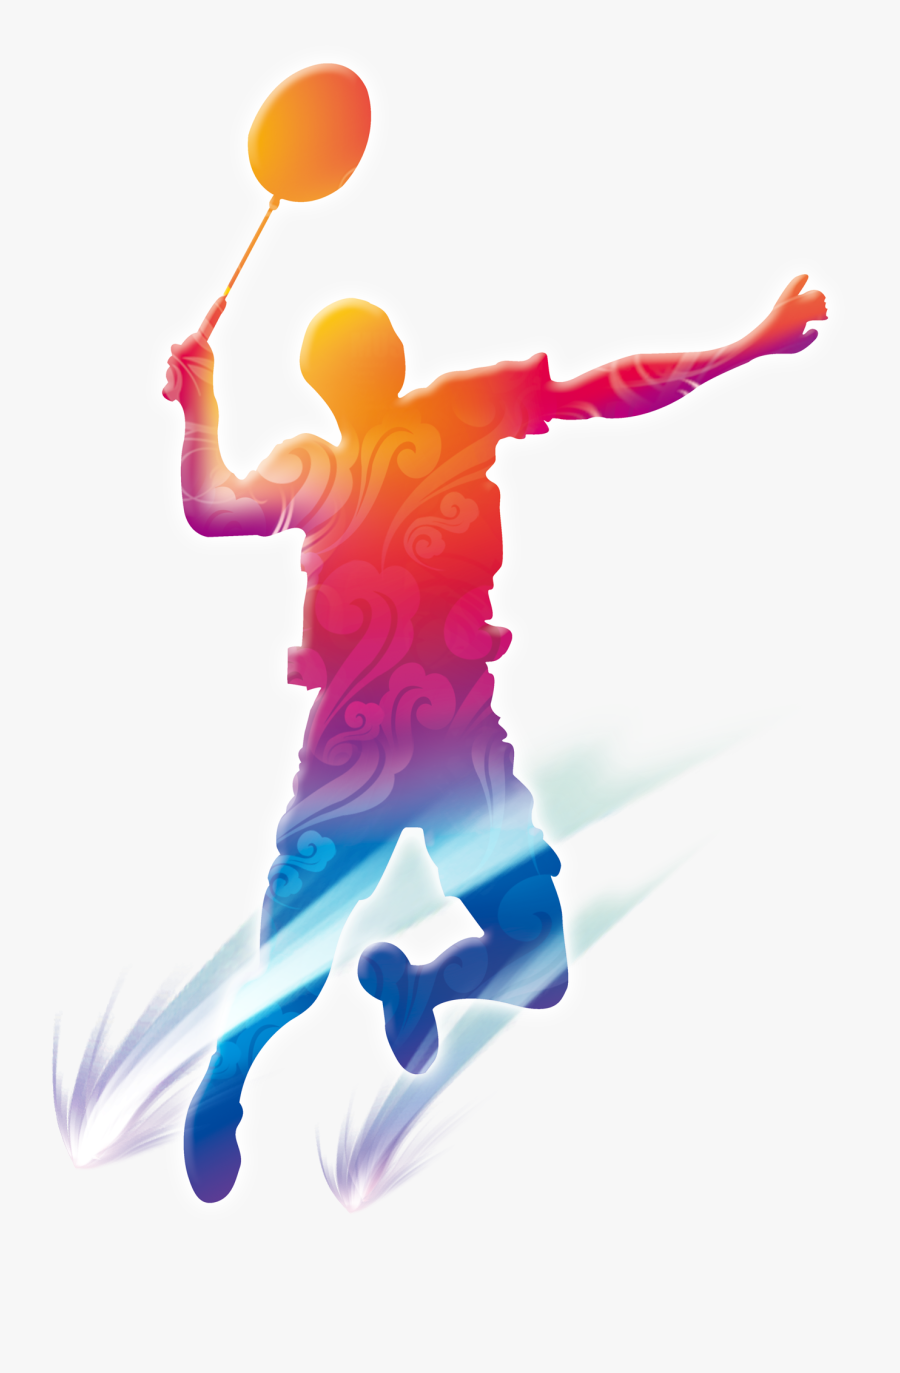 Of Silhouettes Badminton Playing People Free Hd Image, Transparent Clipart